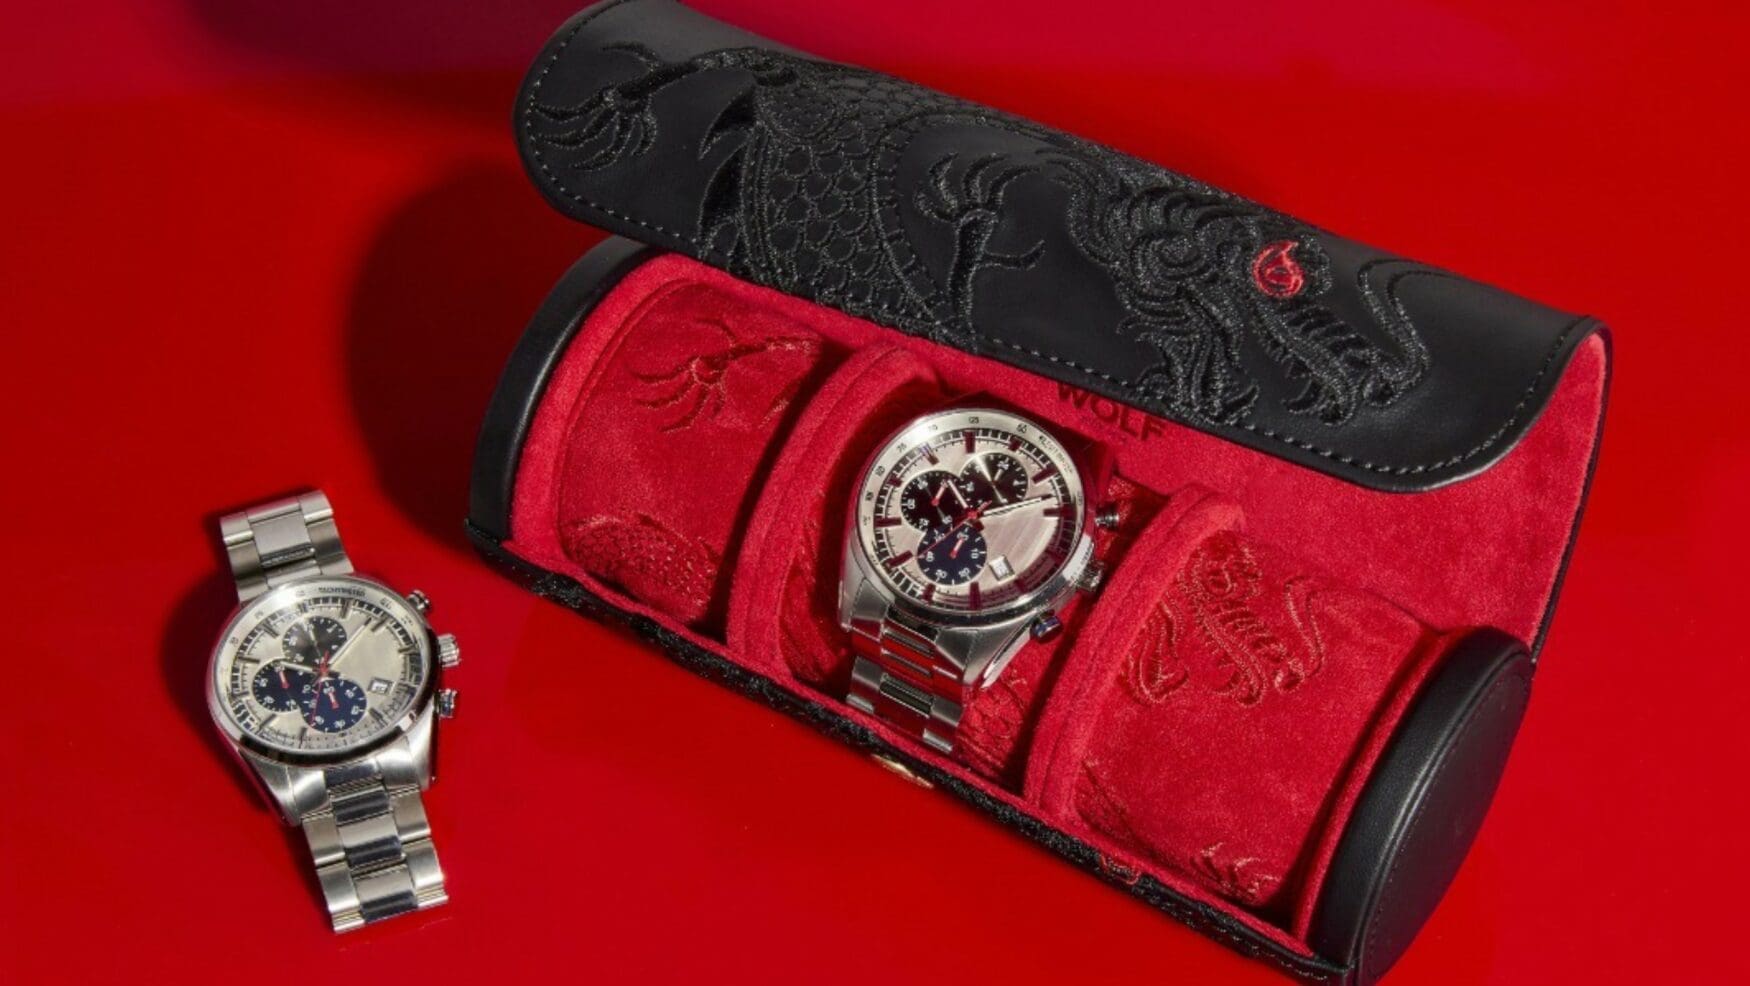 Protect your watches this Lunar New Year with the Wolf Year of the Dragon Triple Watch Roll